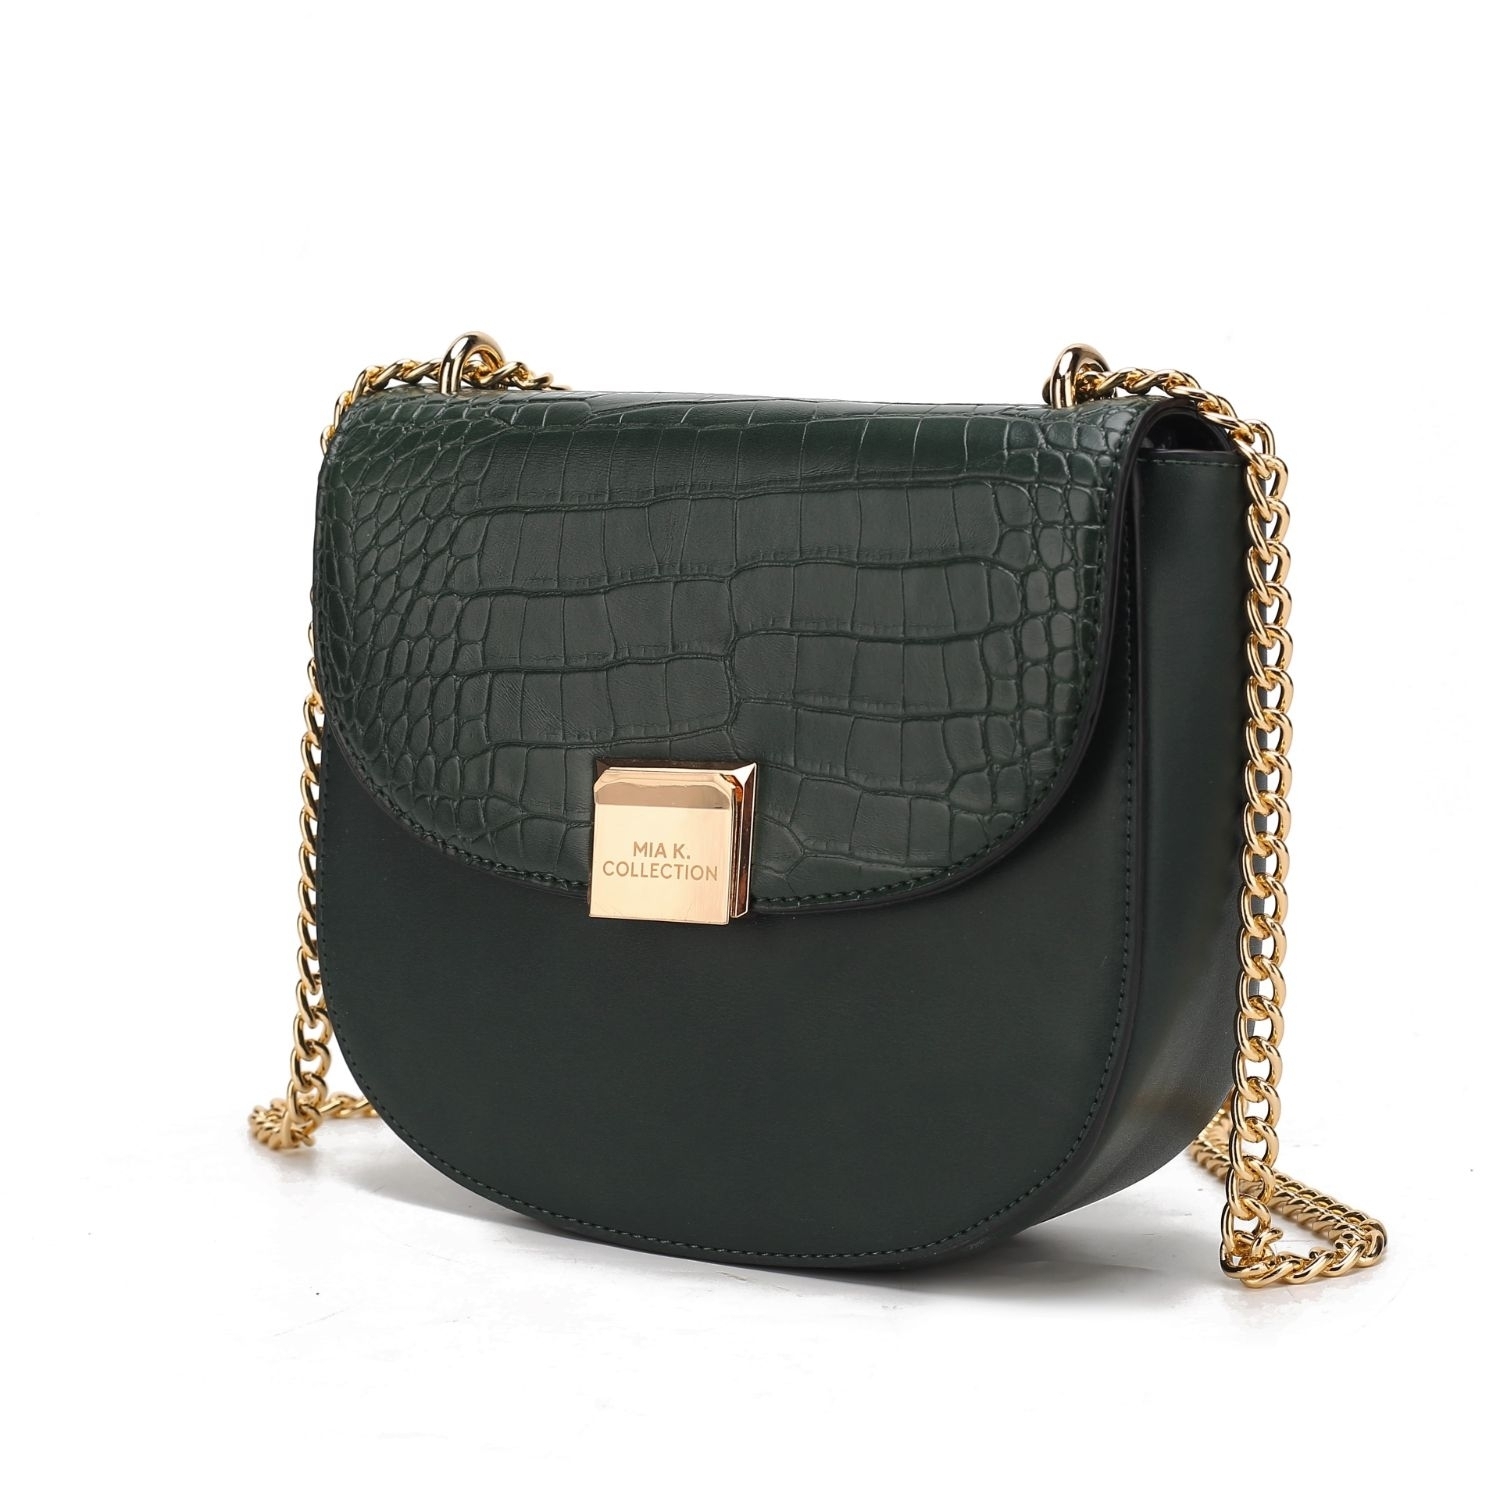 MKF Collection Brooklyn Crocodile Embossed Vegan Leather Womens Shoulder Bag By Mia K - Forest Green